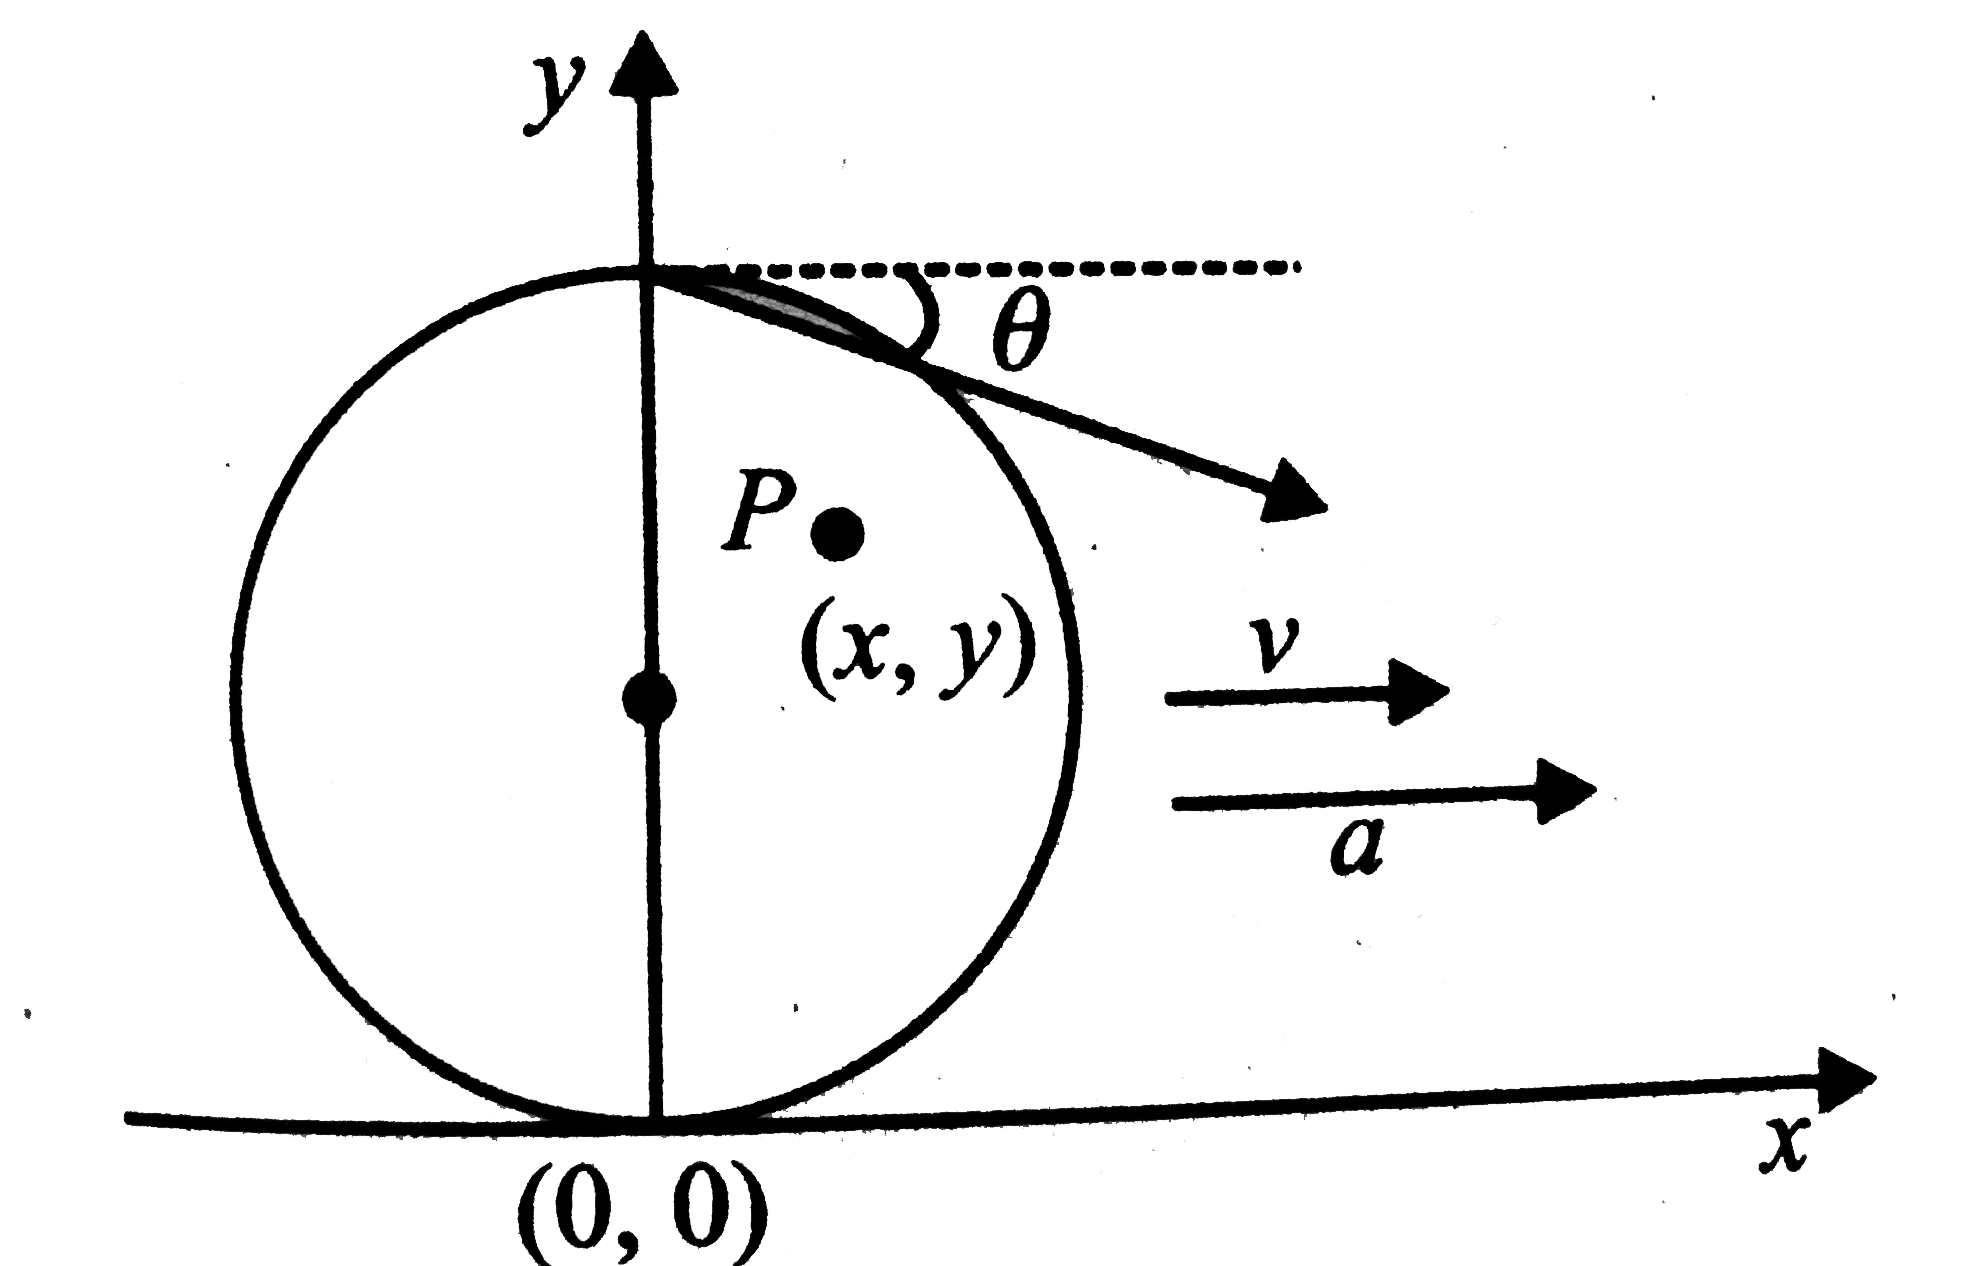 A disc having radius R is rolling without slipping on a horizontal (x-z) plane. Centre of the disc has a velocity  v and acceleration a as shown.    If v=sqrt(2aR) the angle rho between acceleration of the top most point and the horizontal is